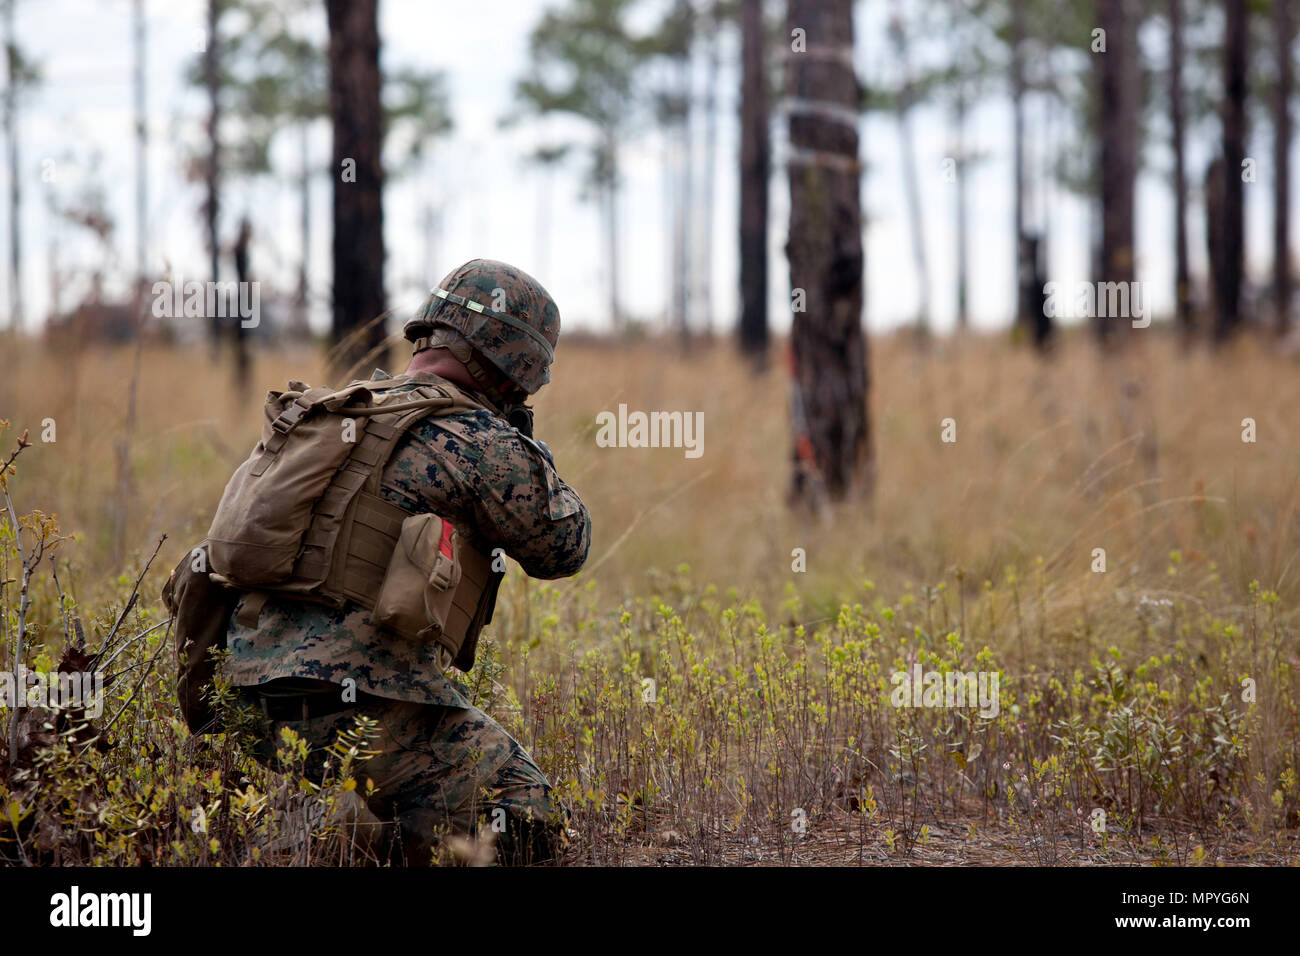 A U.S. Marine attached to Advanced Infantry Training Battalion, School of Infantry-East (SOI-E), fires an M4A1 carbine during a combined arms exercise at Camp Lejeune, N.C., April 7, 2017. The mission of SOI-E is to train entry-level and advanced level Marines in the skills required of an Infantry Marine for the operating forces. (U.S. Marine Corps photo by Lance Cpl. Jose Villalobosrocha) Stock Photo